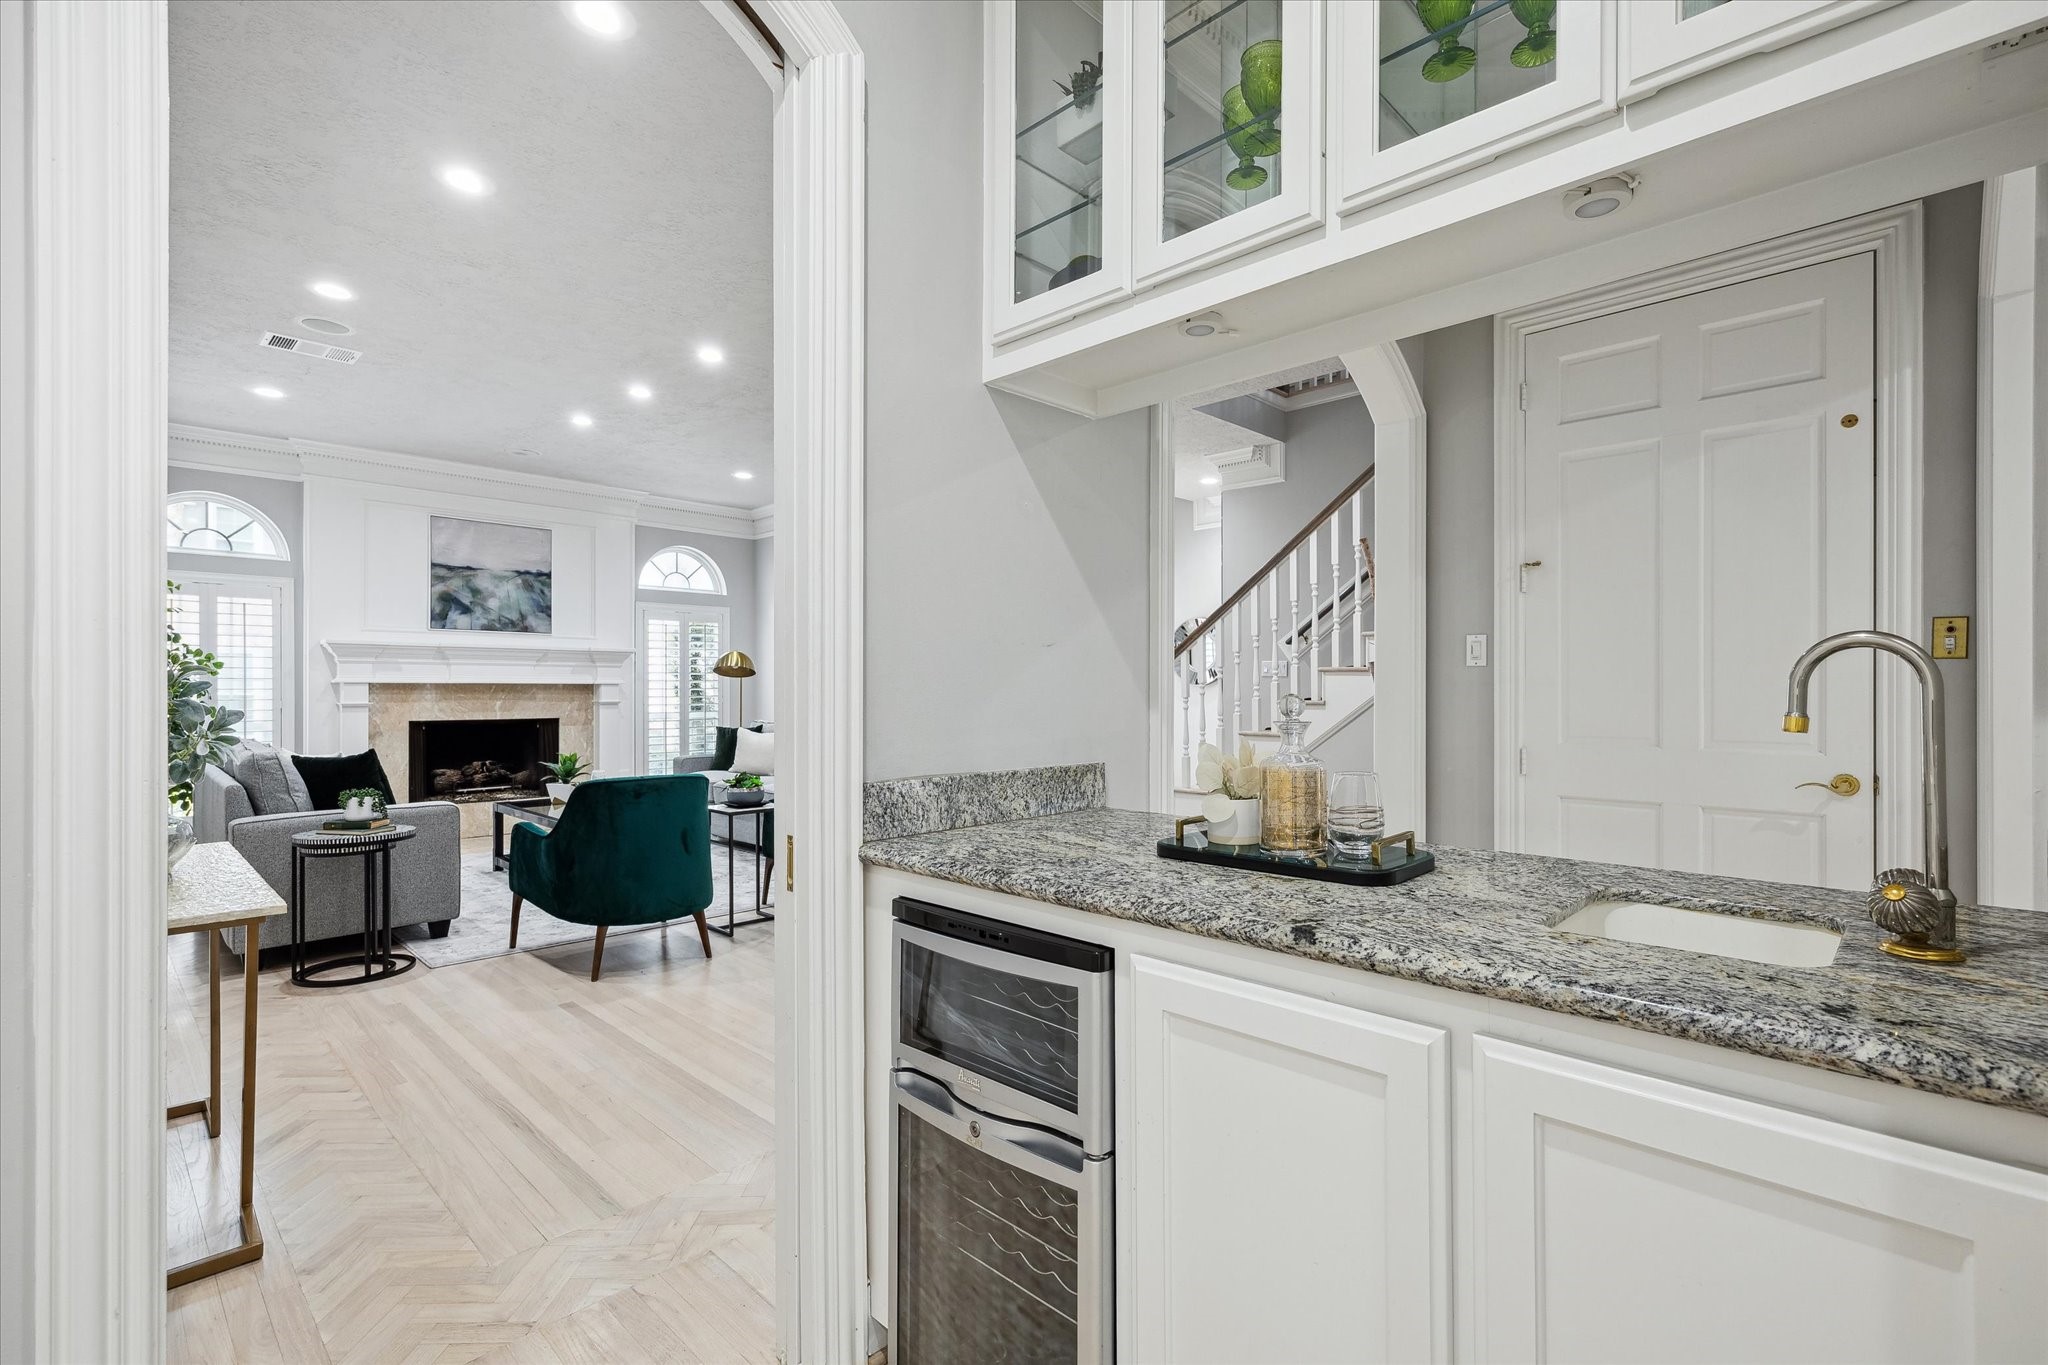 The wet bar with wine chiller has granite counters and is centrally situated off the kitchen making it convenient for servicing family and friend gatherings.  Across from the bar area is the elevator closet that serve 1st and 2nd floors.